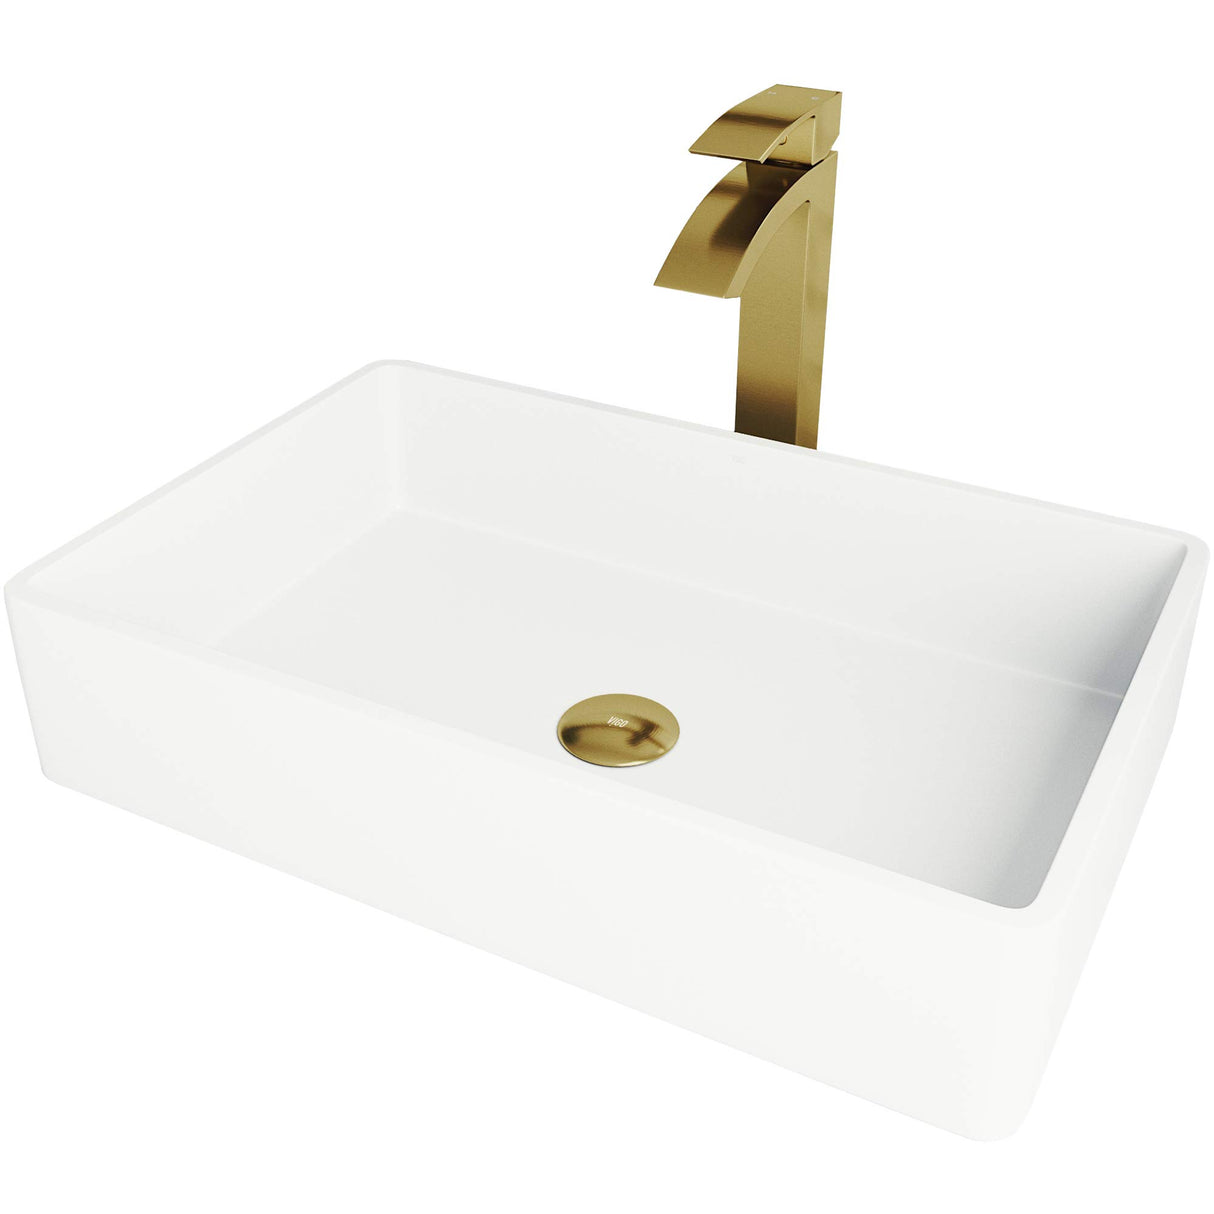 VIGO VGT1458 13.88" L -21.25" W -12.0" H Handmade Countertop White Matte Stone Rectangle Vessel Bathroom Sink Set in Matte White Finish with Faucet in Matte Brushed Gold and Pop Up Drain